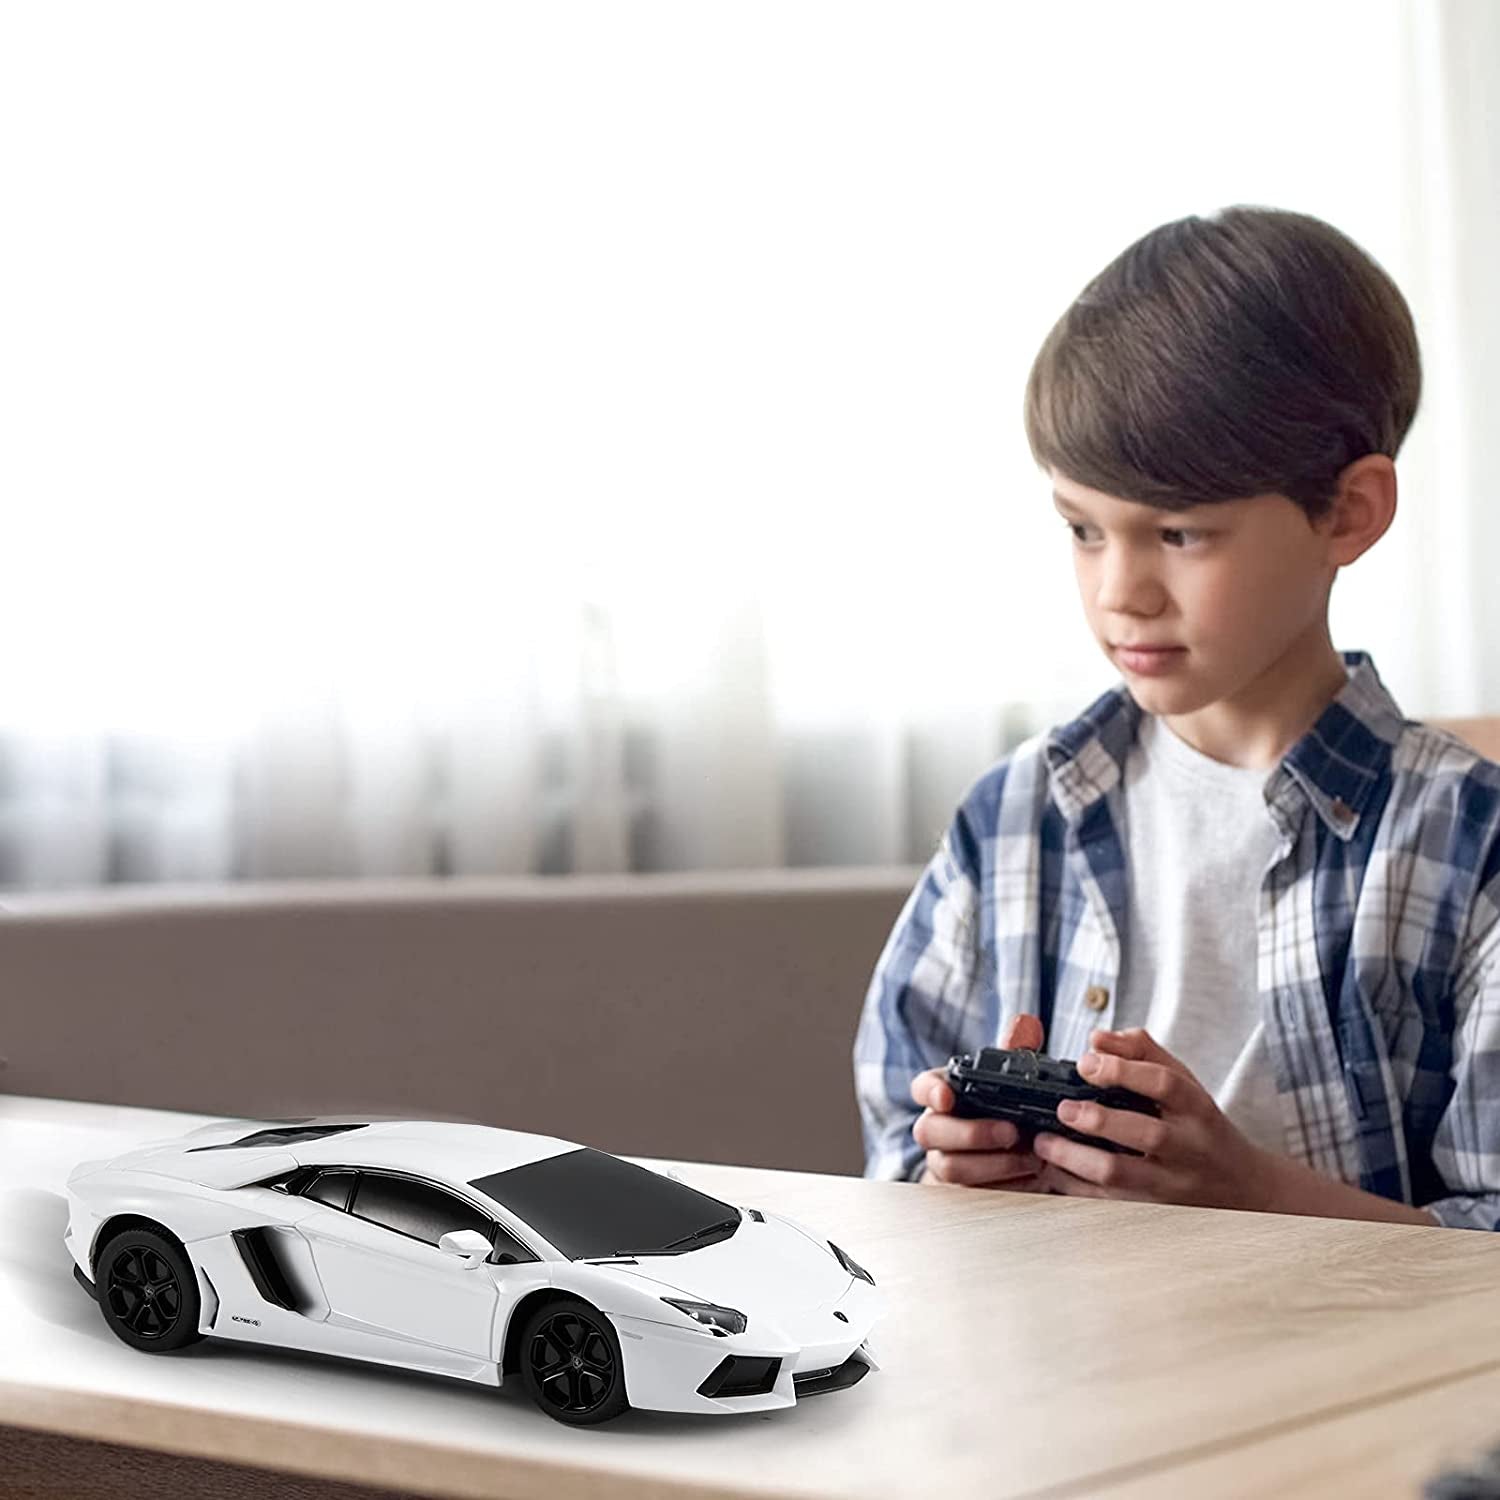 X Rastar Remote Control Car, 1:24 Scale Aventador Coupe Race Toy Car, RC Hobby Model Vehicle for Boys, Girls and Adults, White